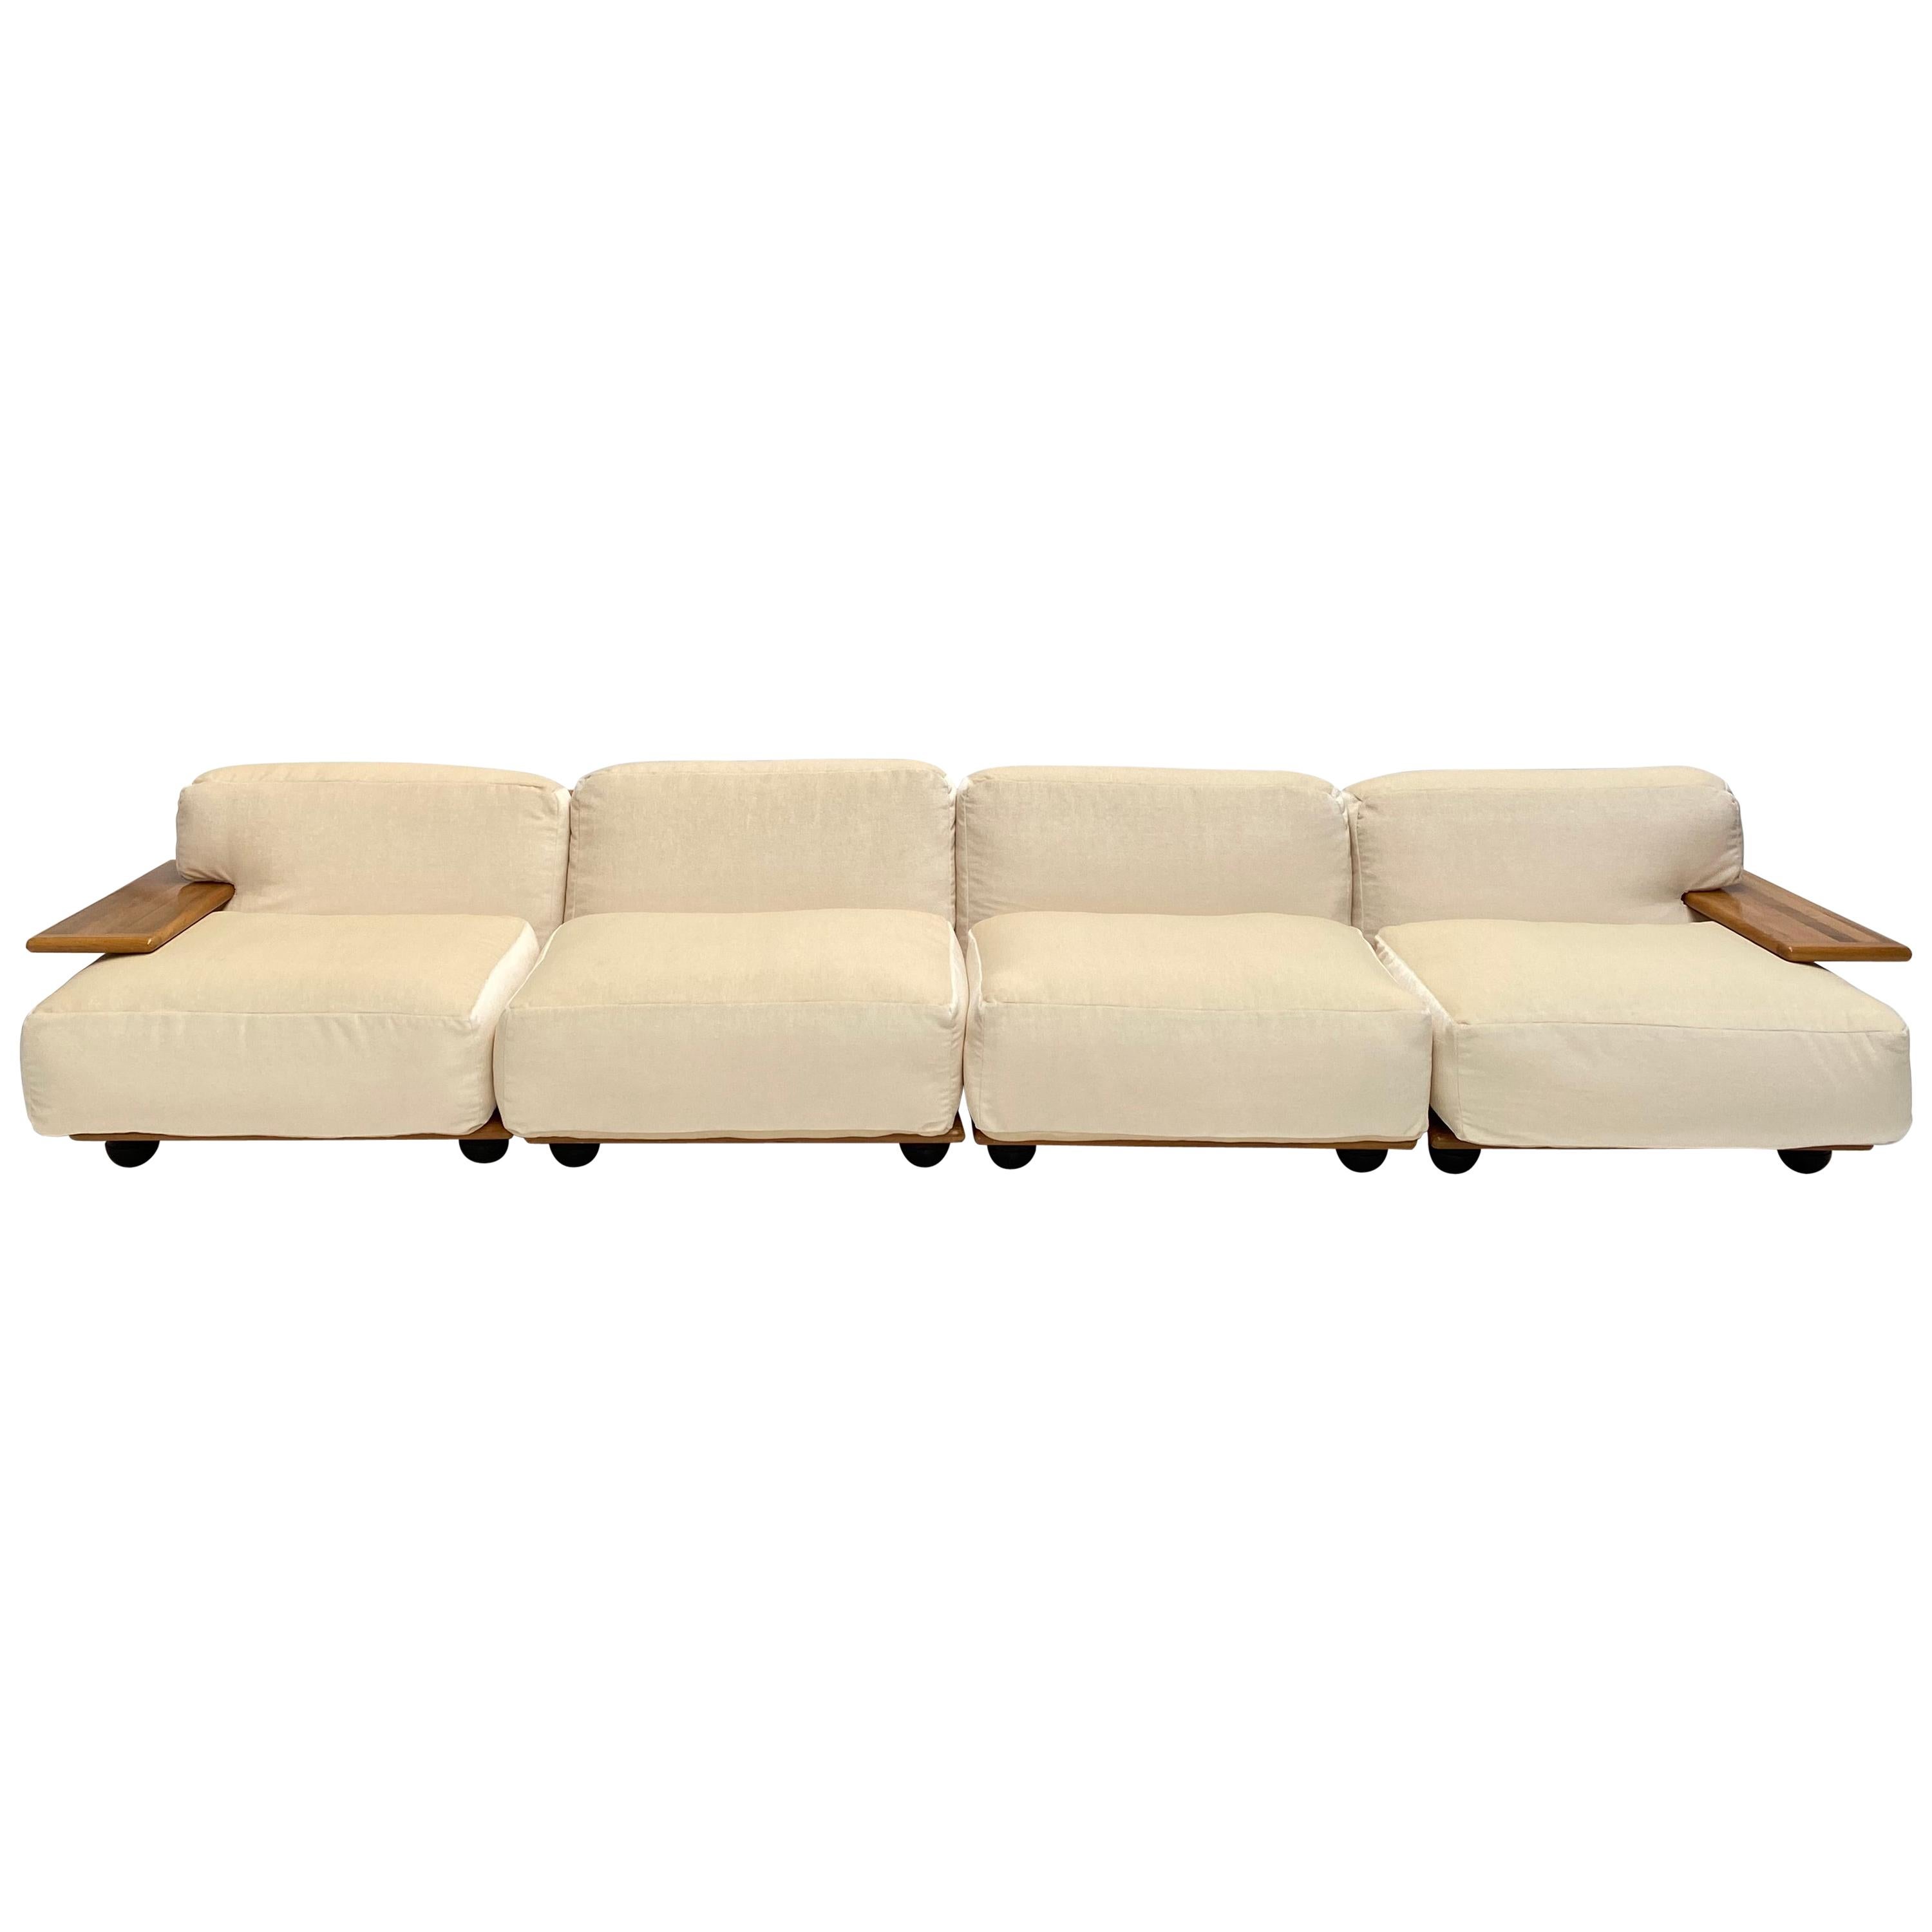 Hand-Crafted Pair of Mario Bellini 3 Seat 'Pianura' Sofas & Table, Mohair & Solid Walnut 1971